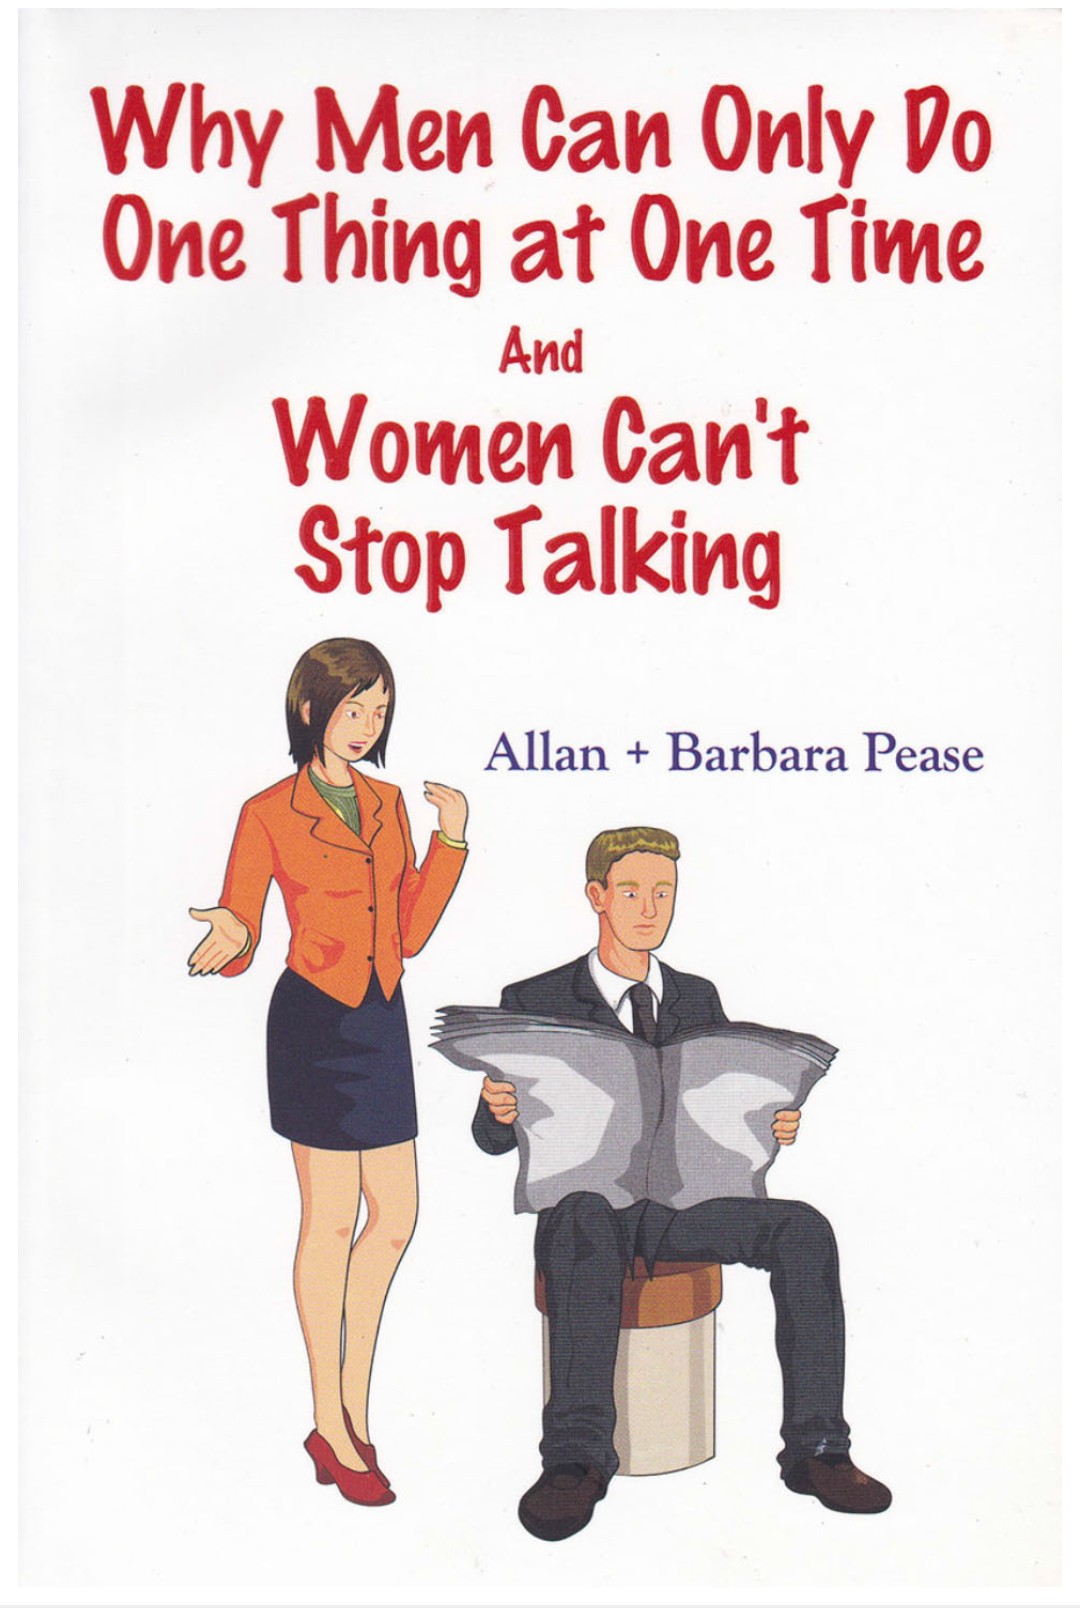 Women and men can. Man can women cant. Women cant lead women cant win текст. Why do men Lie and women Cry Allan and Barbara pdf download. Как правильно stop to talk или stop talking.